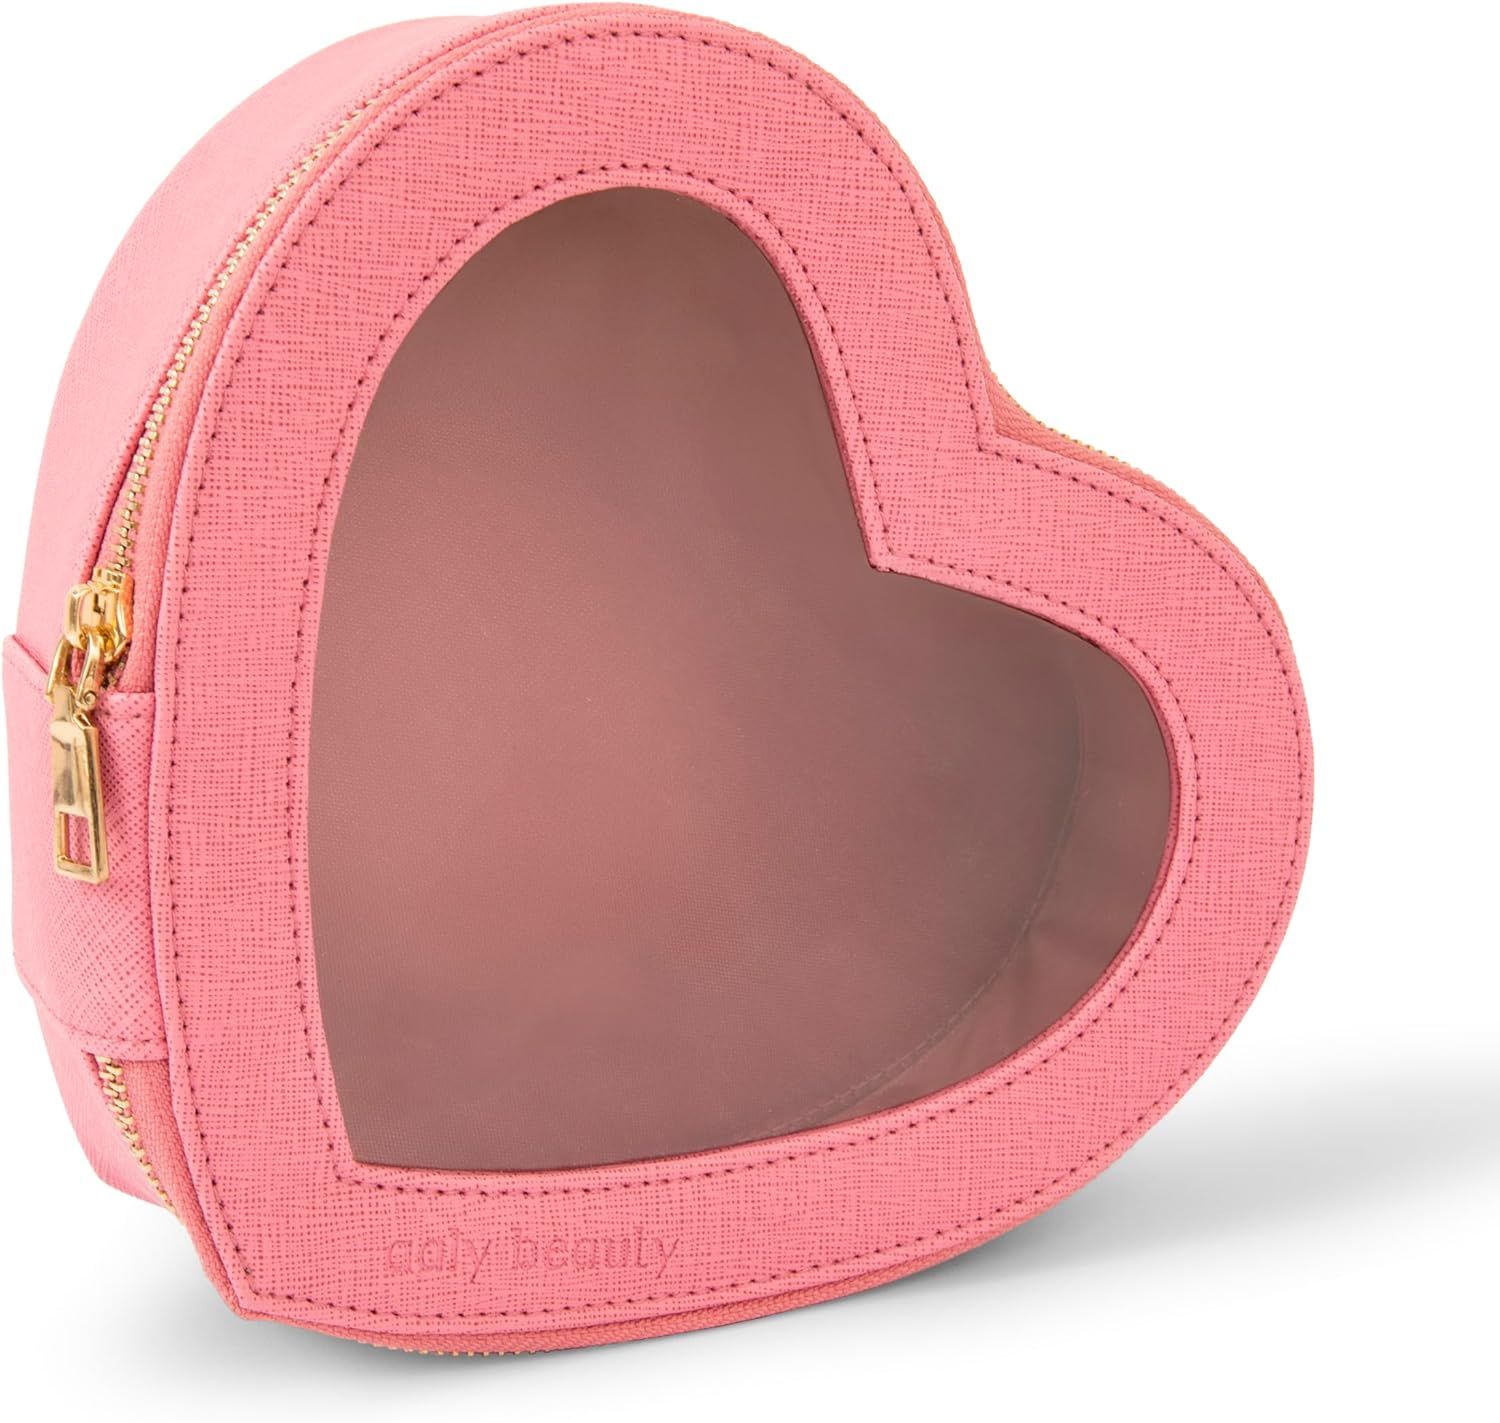 Aaly Beauty Heart Makeup Bag – Valentine's Day Pink Heart Shaped Cosmetic Organizer with Clear ... | Amazon (US)